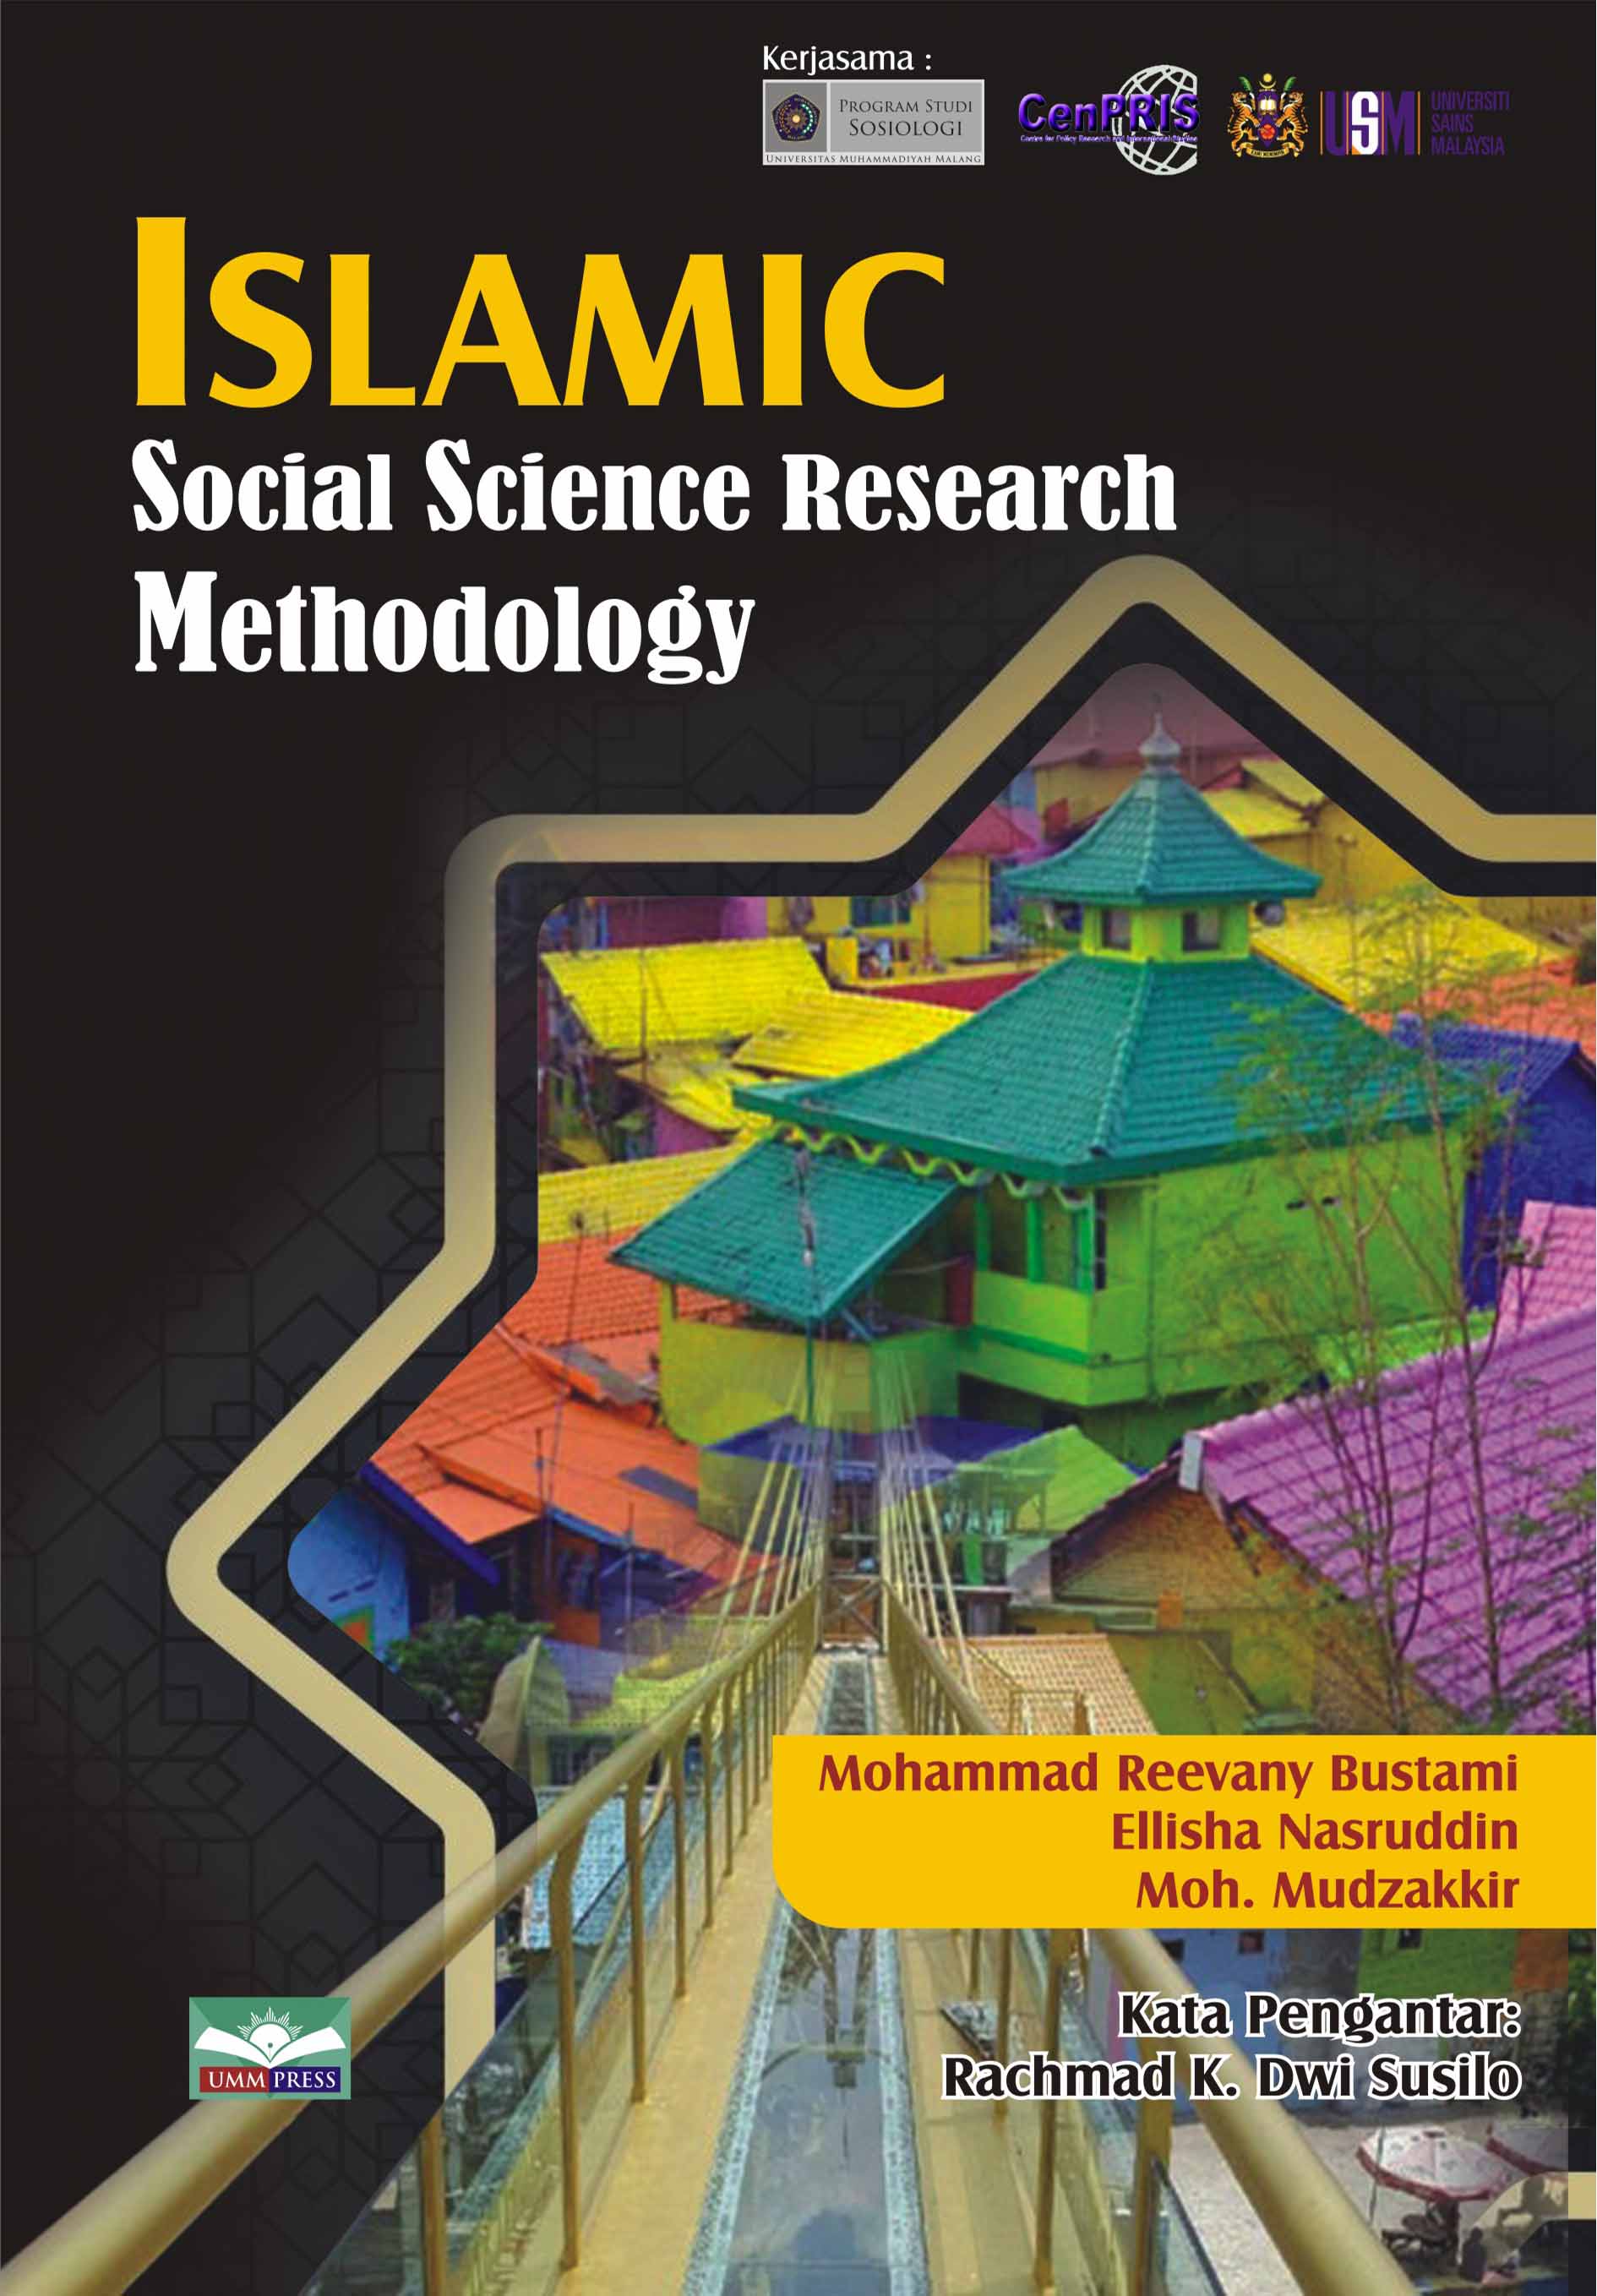 ISLAMIC SOCIAL SCIENCE RESEARCH METHODOLOGY